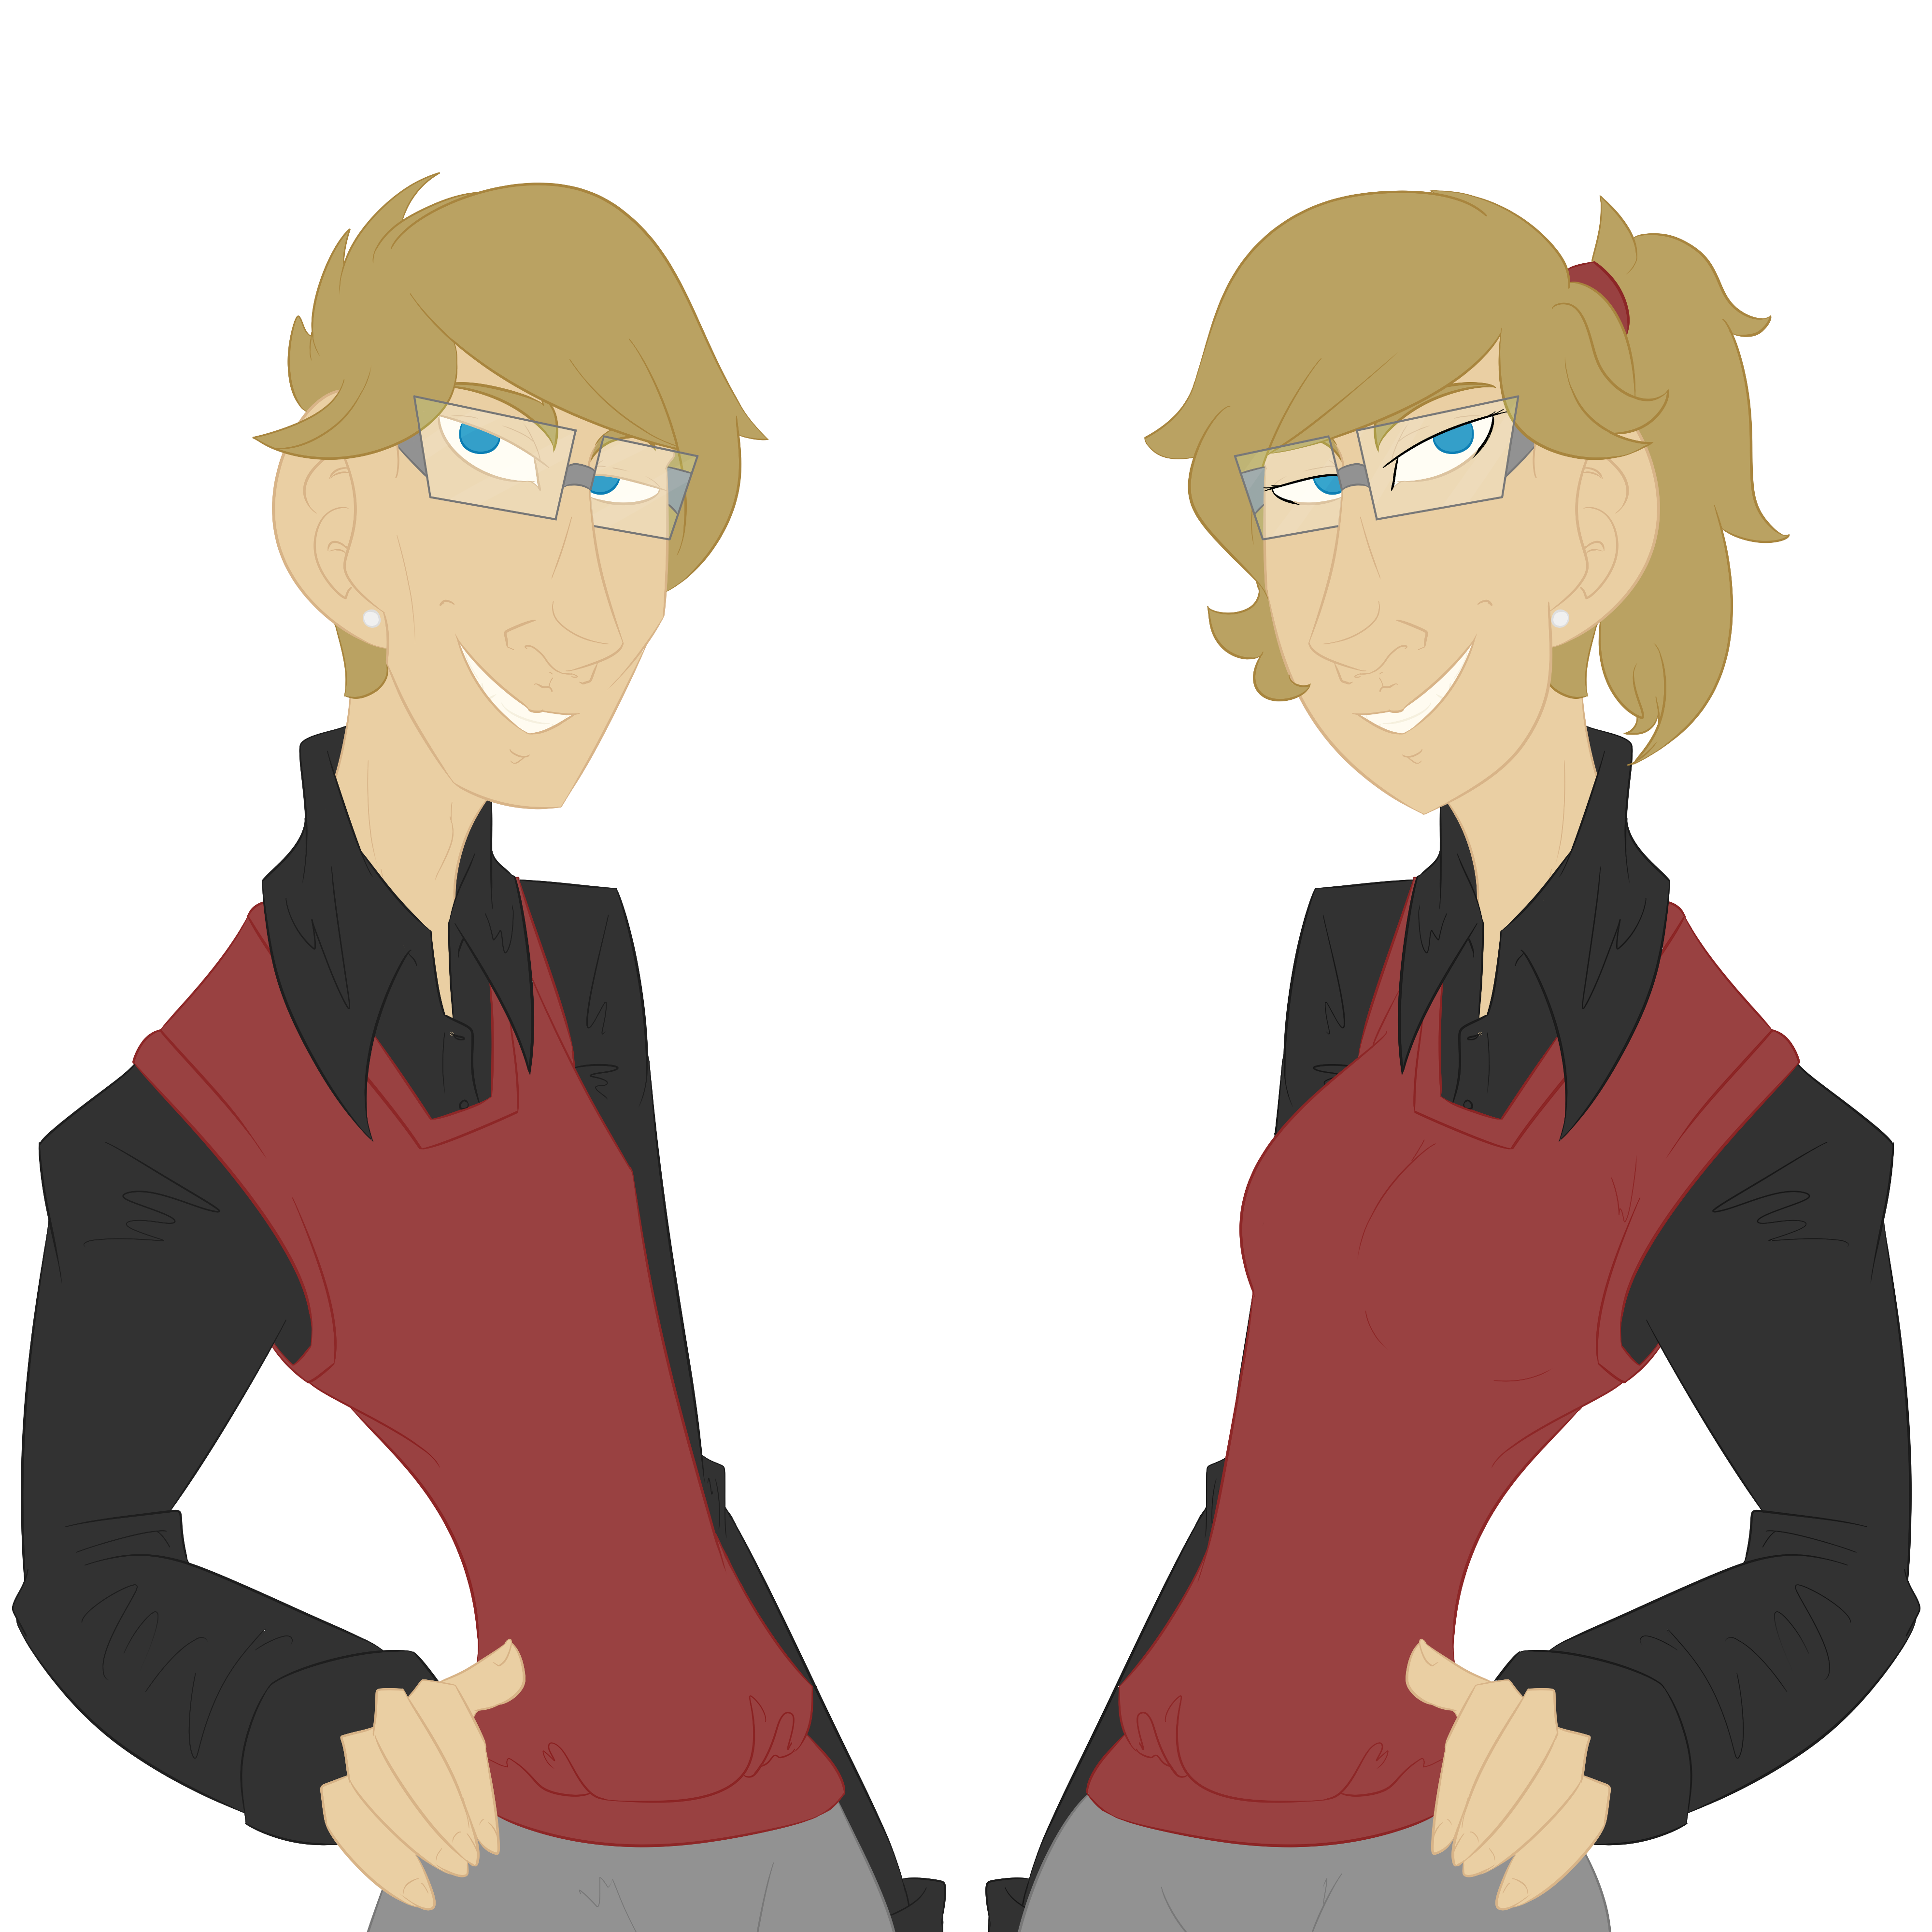 jack_and_jill__done__by_celestialembalmer-dbst06k.png